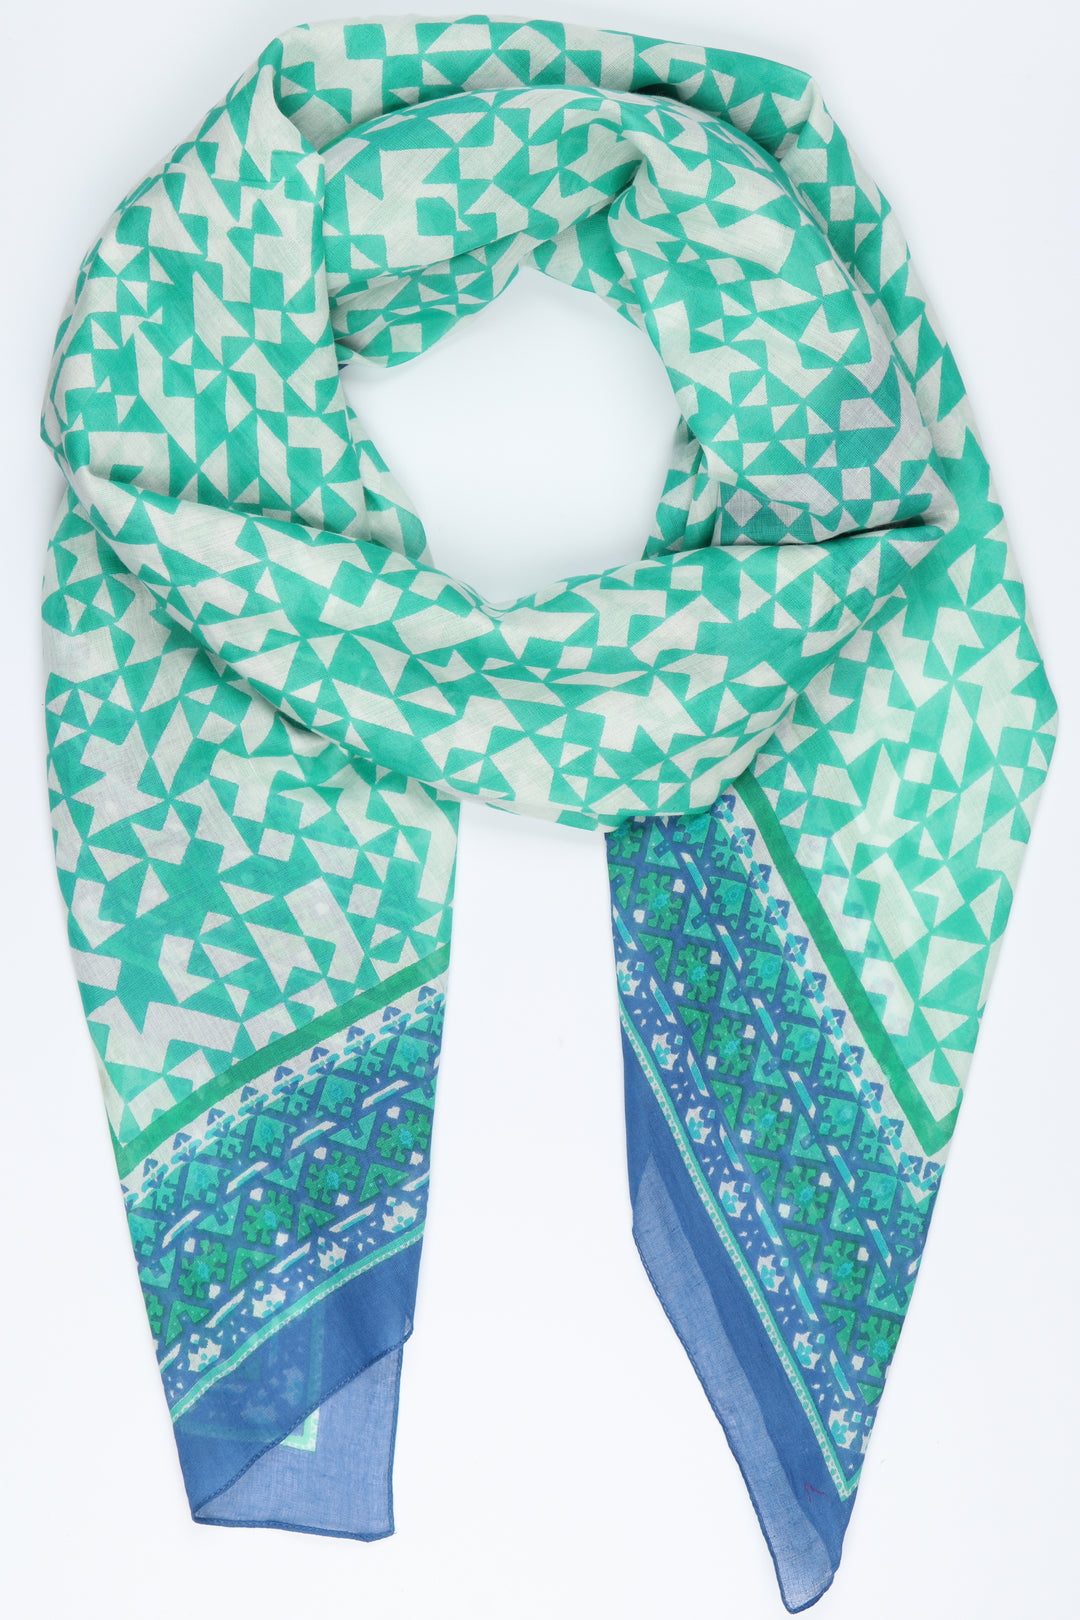 green mosaic print cotton scarf with blue patterned border trim